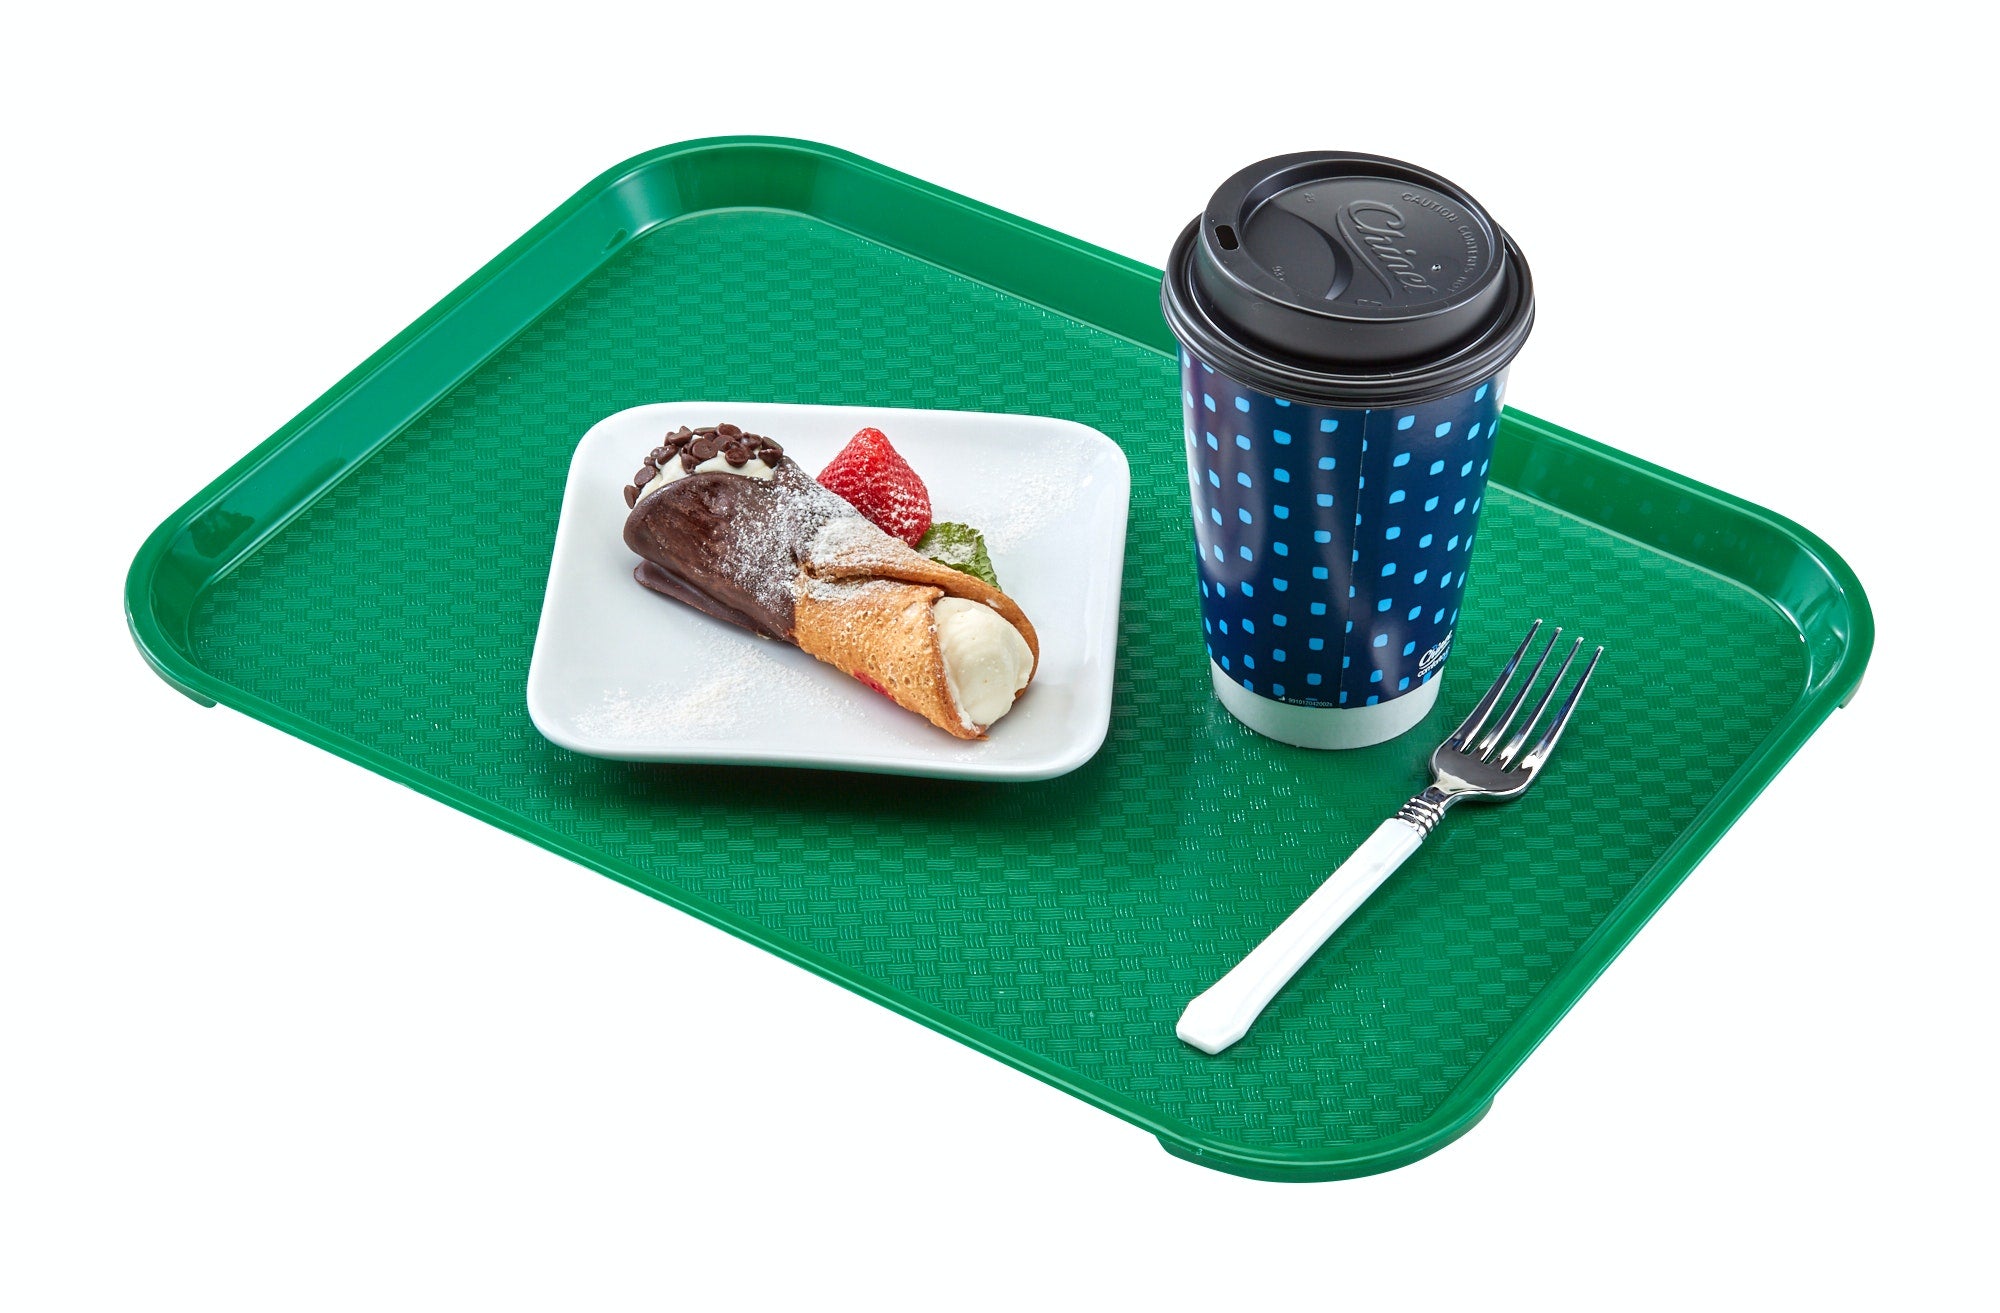 CAMBRO FAST FOOD TRAY SHERWOOD GREEN - 30X41 CM - Mabrook Hotel Supplies